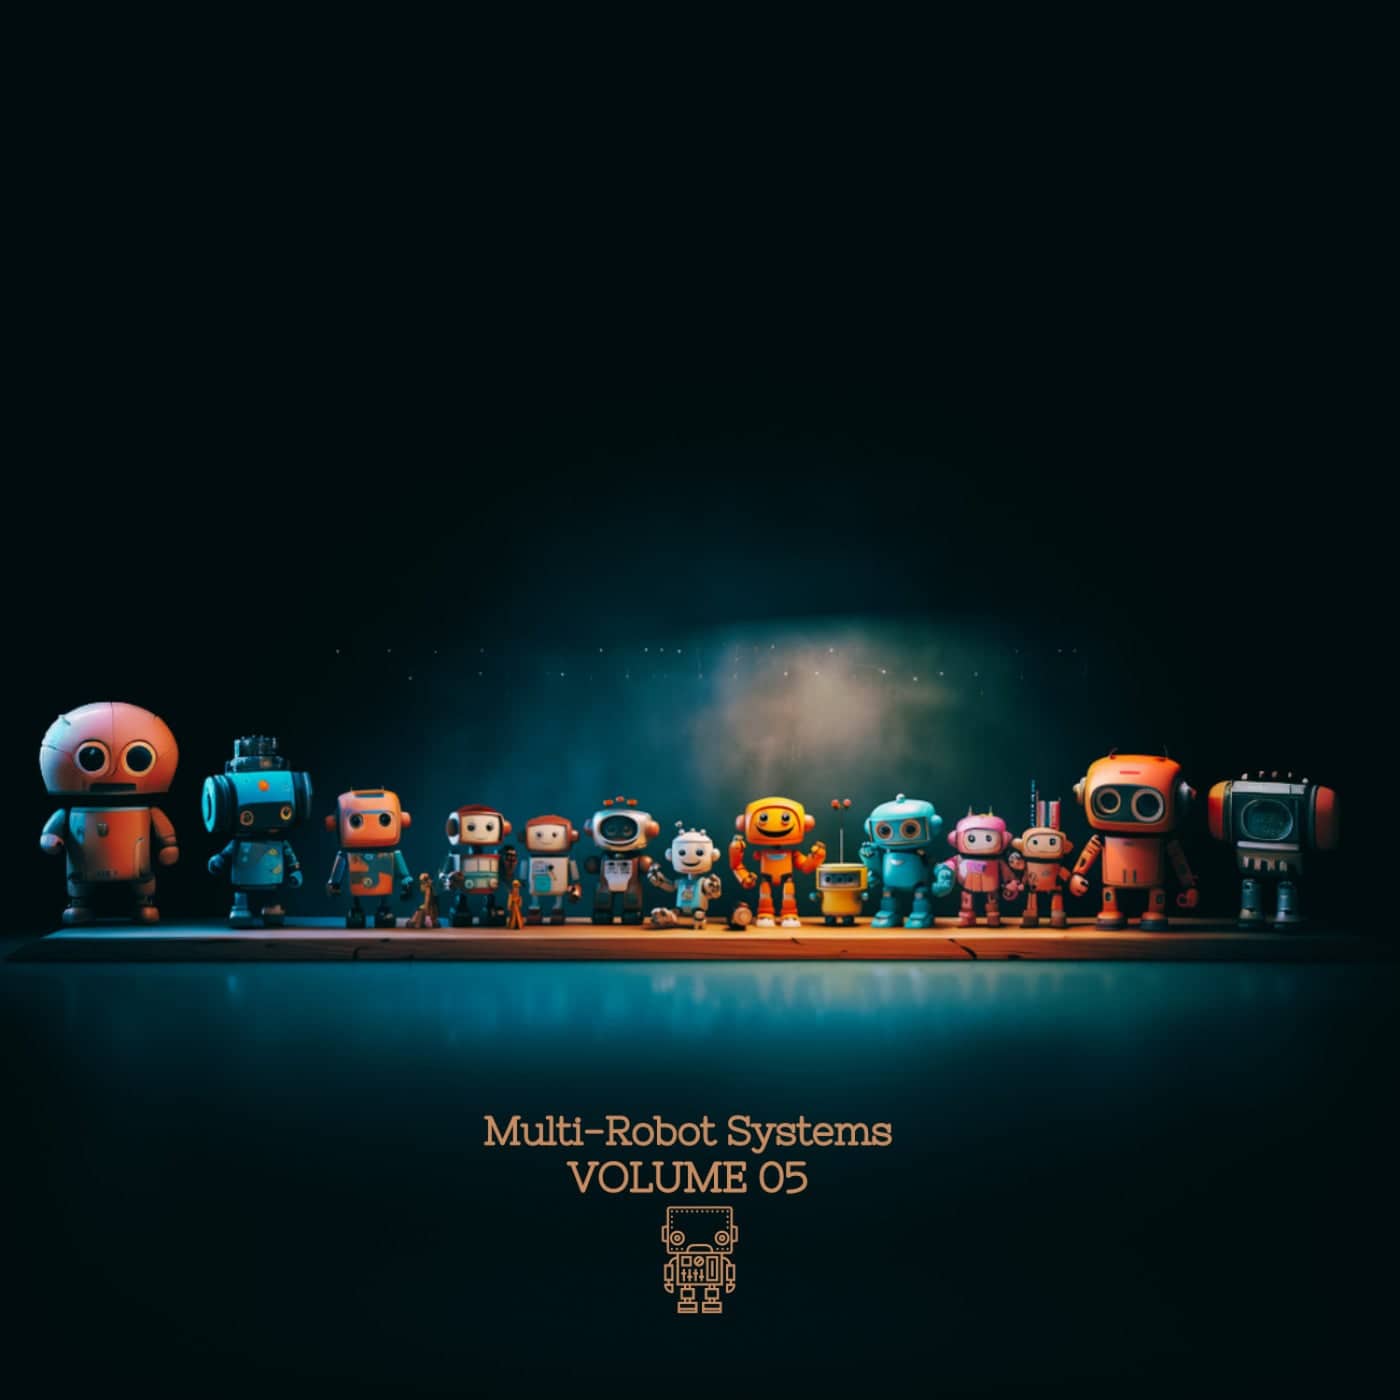 image cover: Multi-Robot Systems, Vol. 5 by VA on SAPIENT ROBOTS